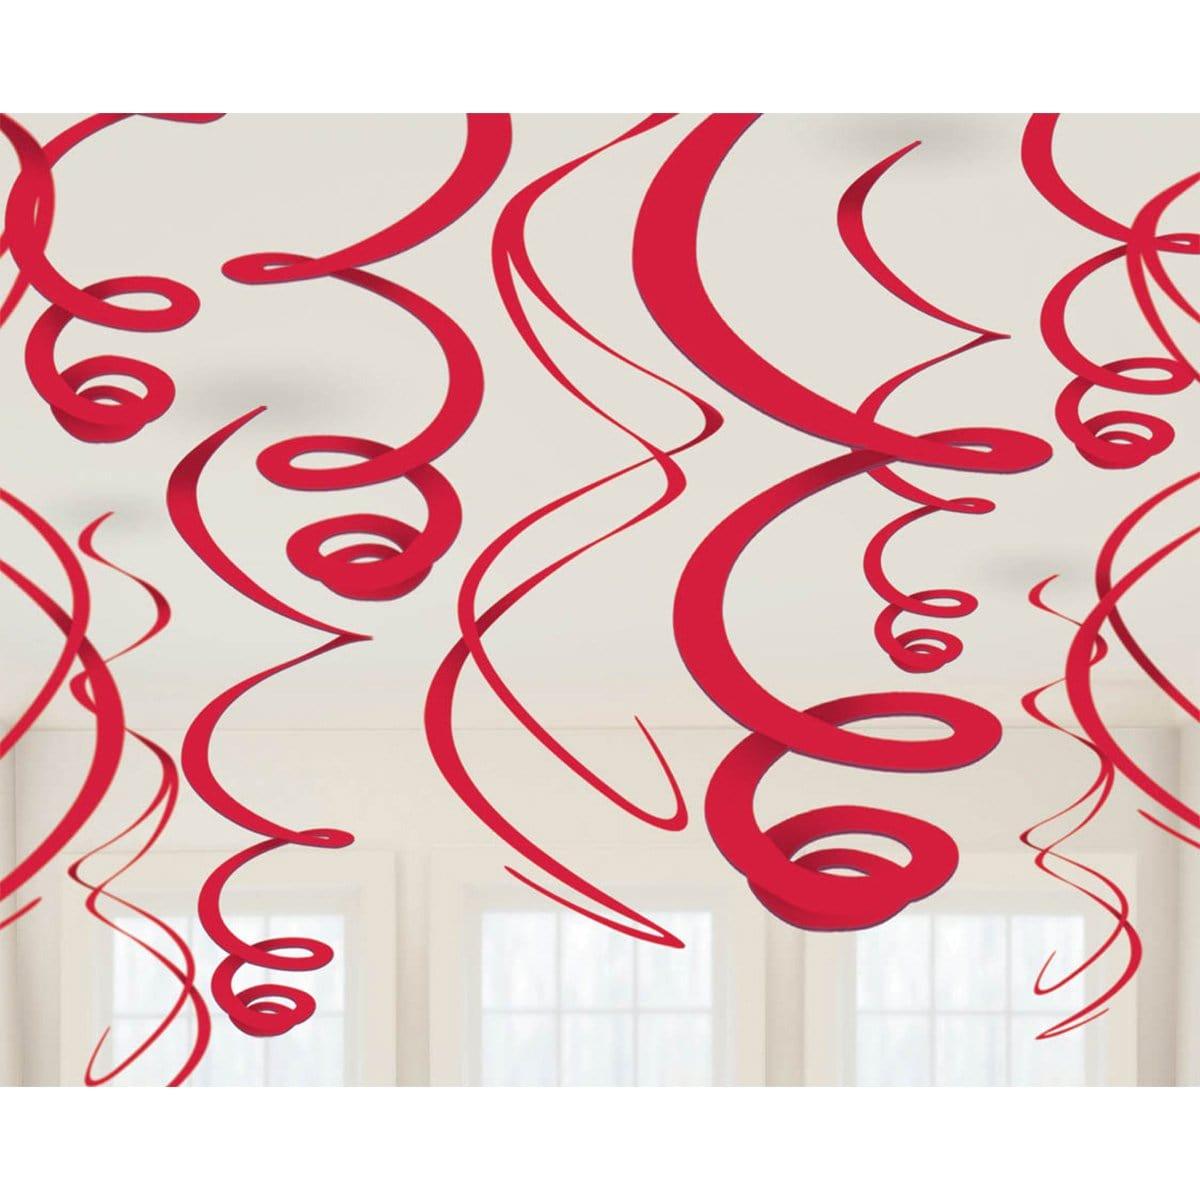 Buy Decorations Swirl Decorations - Red 12/pkg. sold at Party Expert